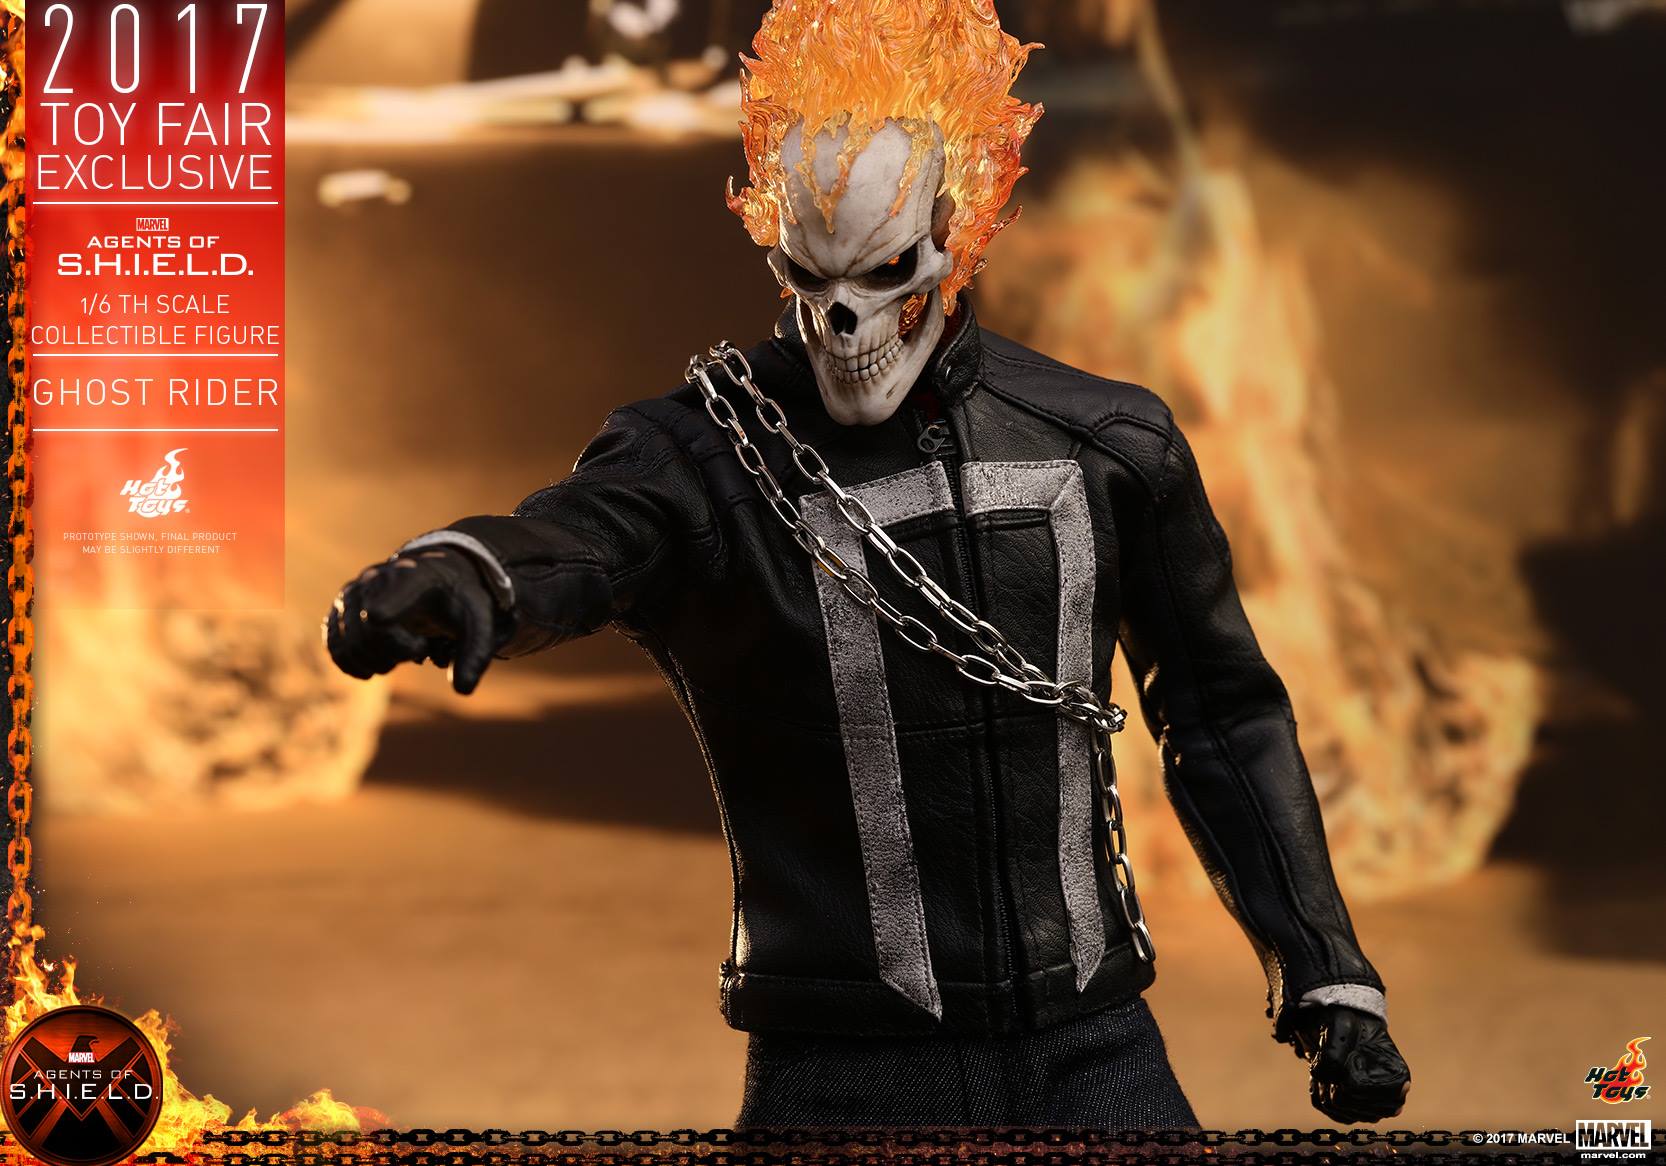 Agents of SHIELD -1/6th scale Ghost Rider Collectible Figure